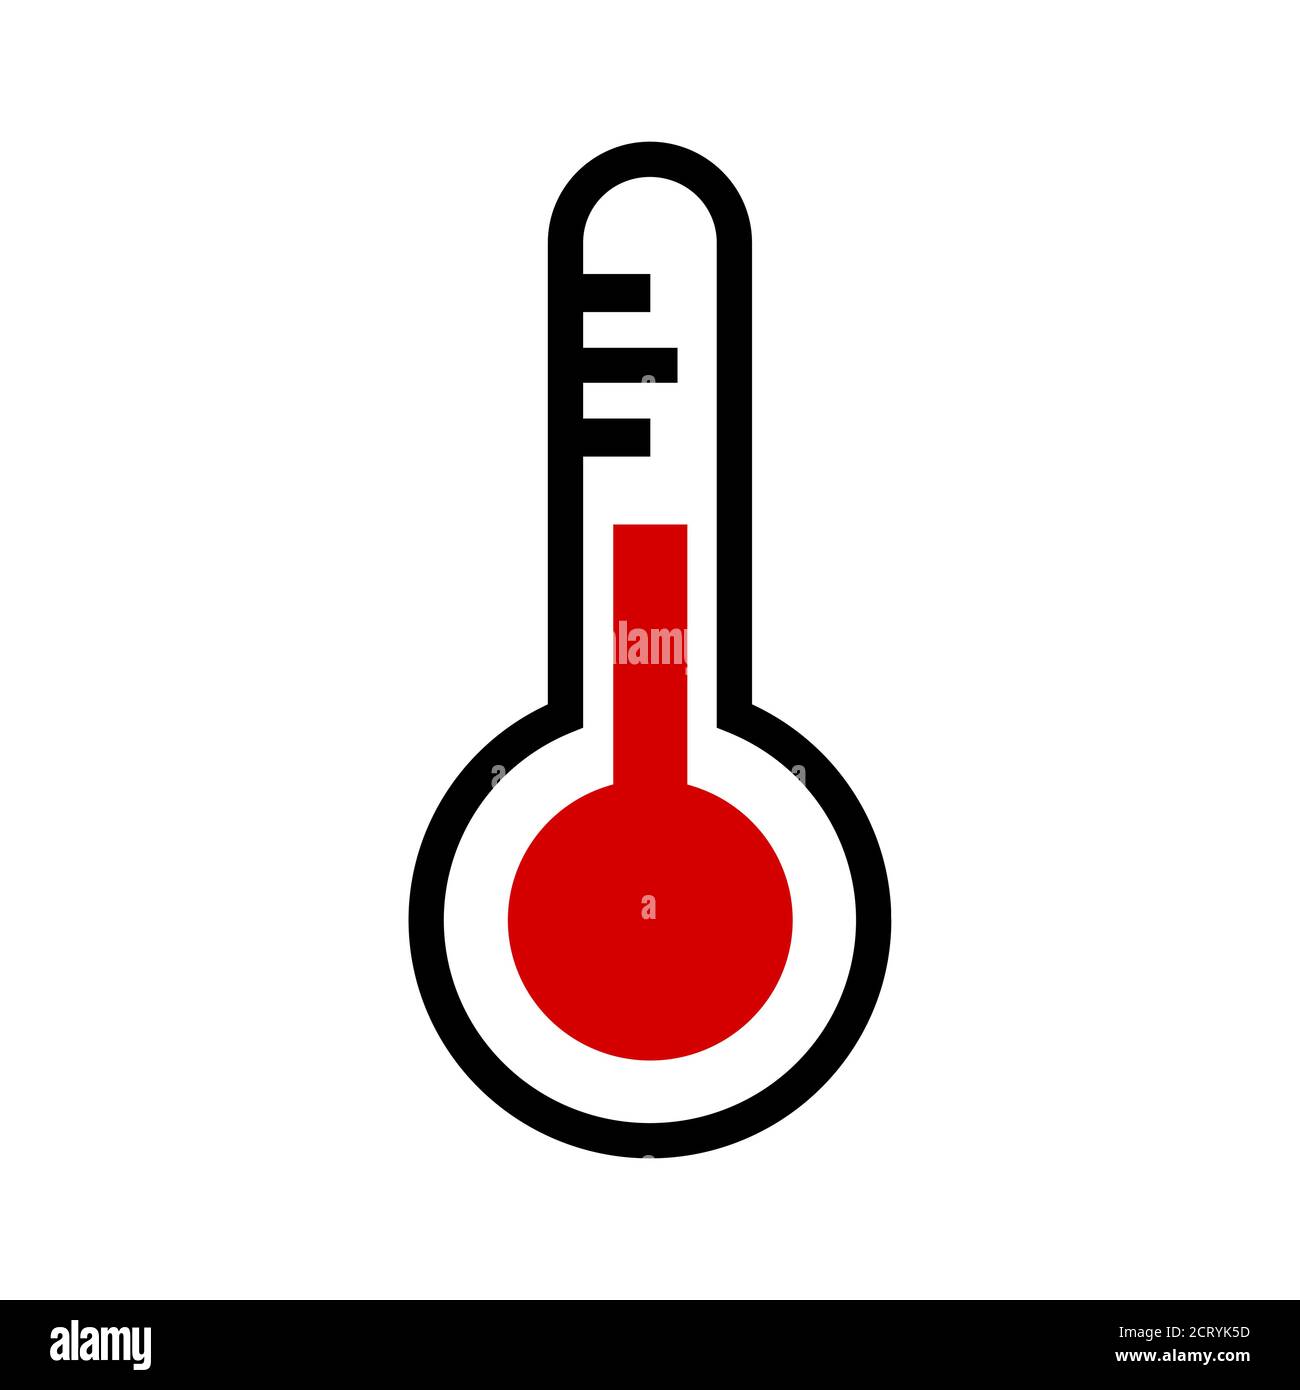 https://c8.alamy.com/comp/2CRYK5D/thermometer-temperature-measurement-icon-vector-image-2CRYK5D.jpg